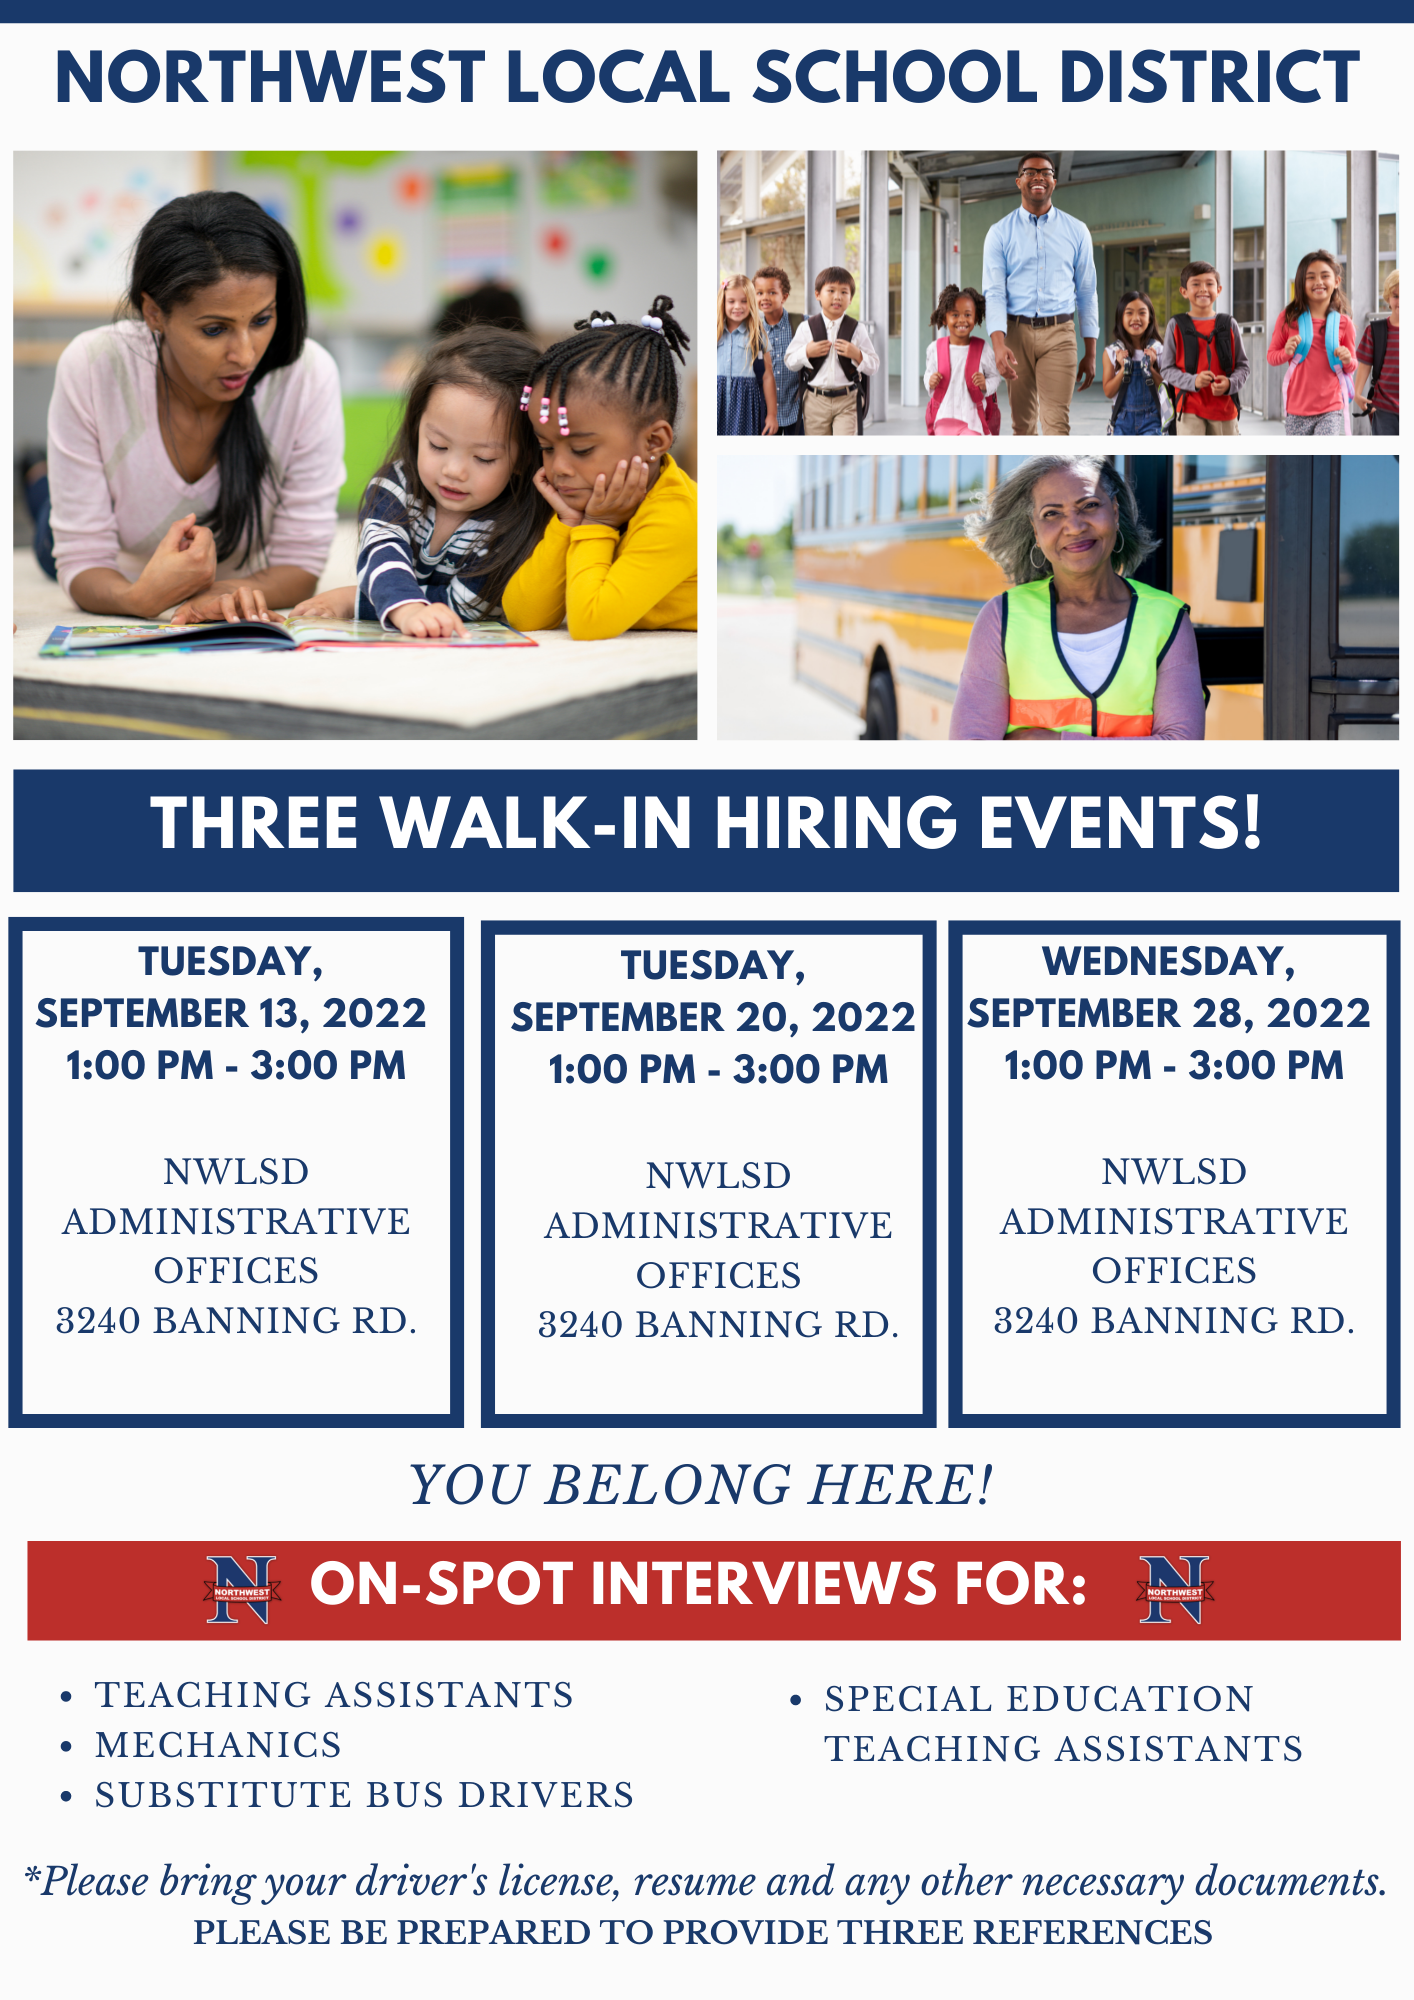 Northwest Local School District will be hosting three walk-in hiring events throughout the month of September!